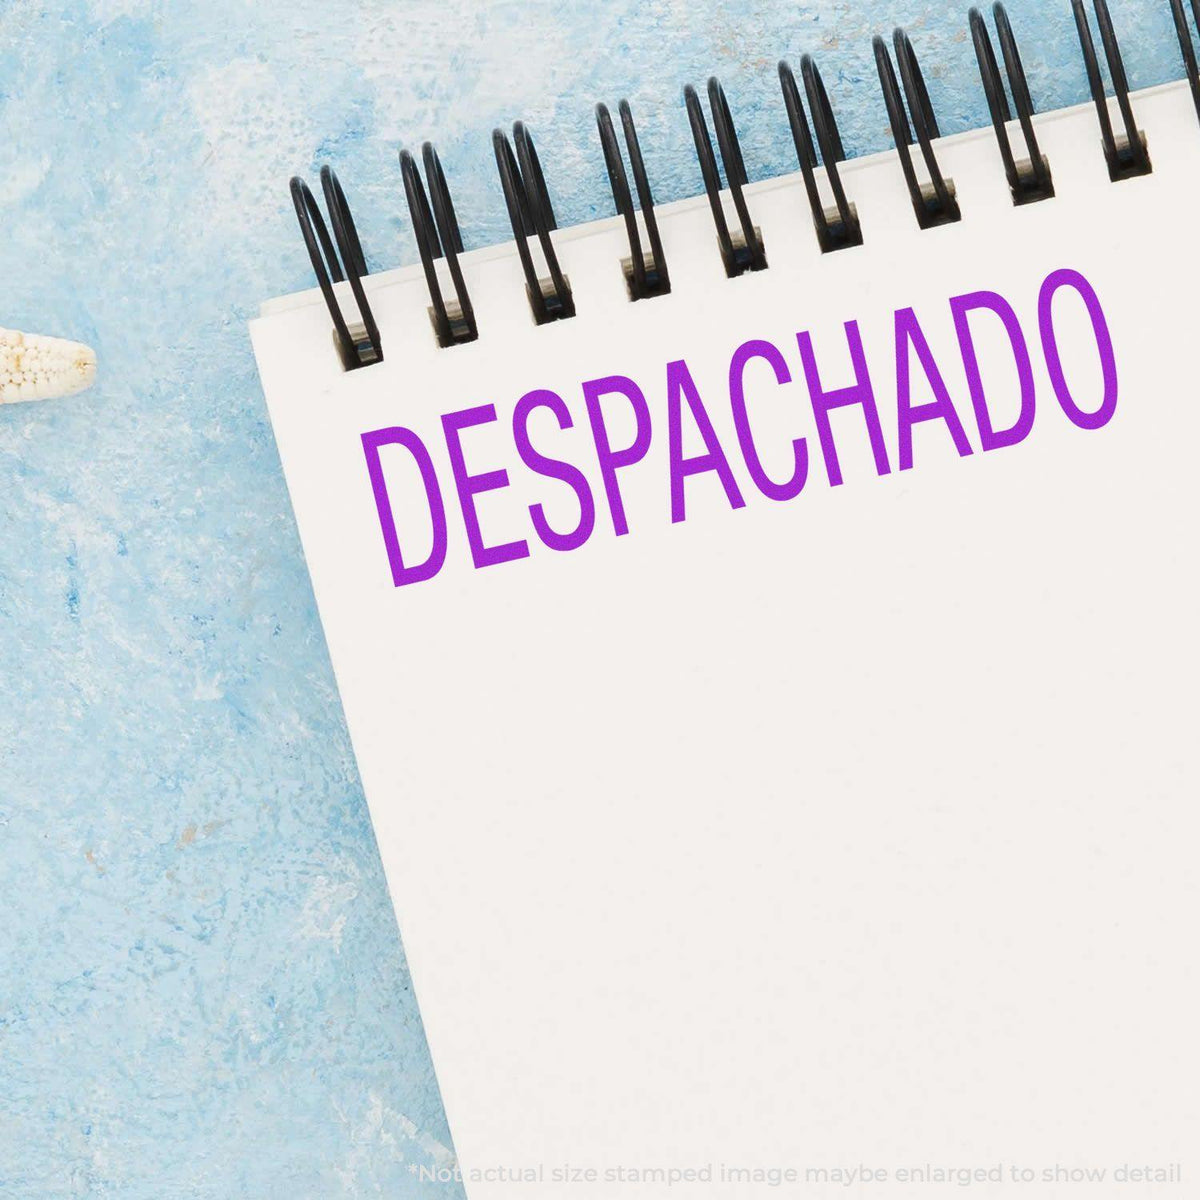 Large Despachado Rubber Stamp In Use Photo